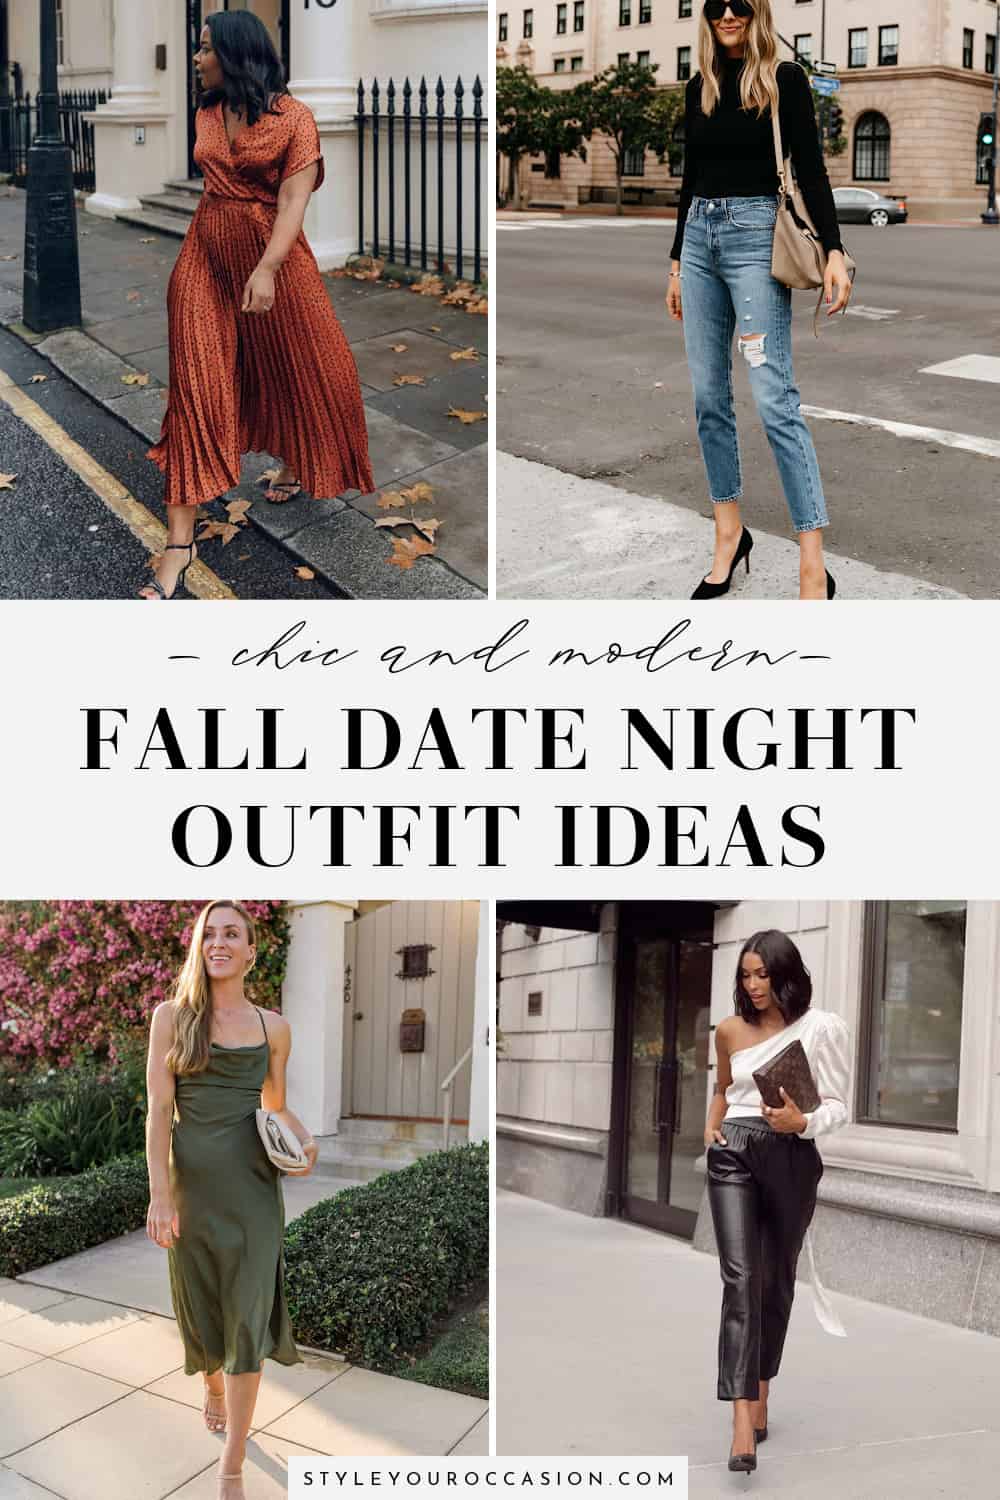 15 Chic Fall Date Night Outfits You Ll Feel Amazing In